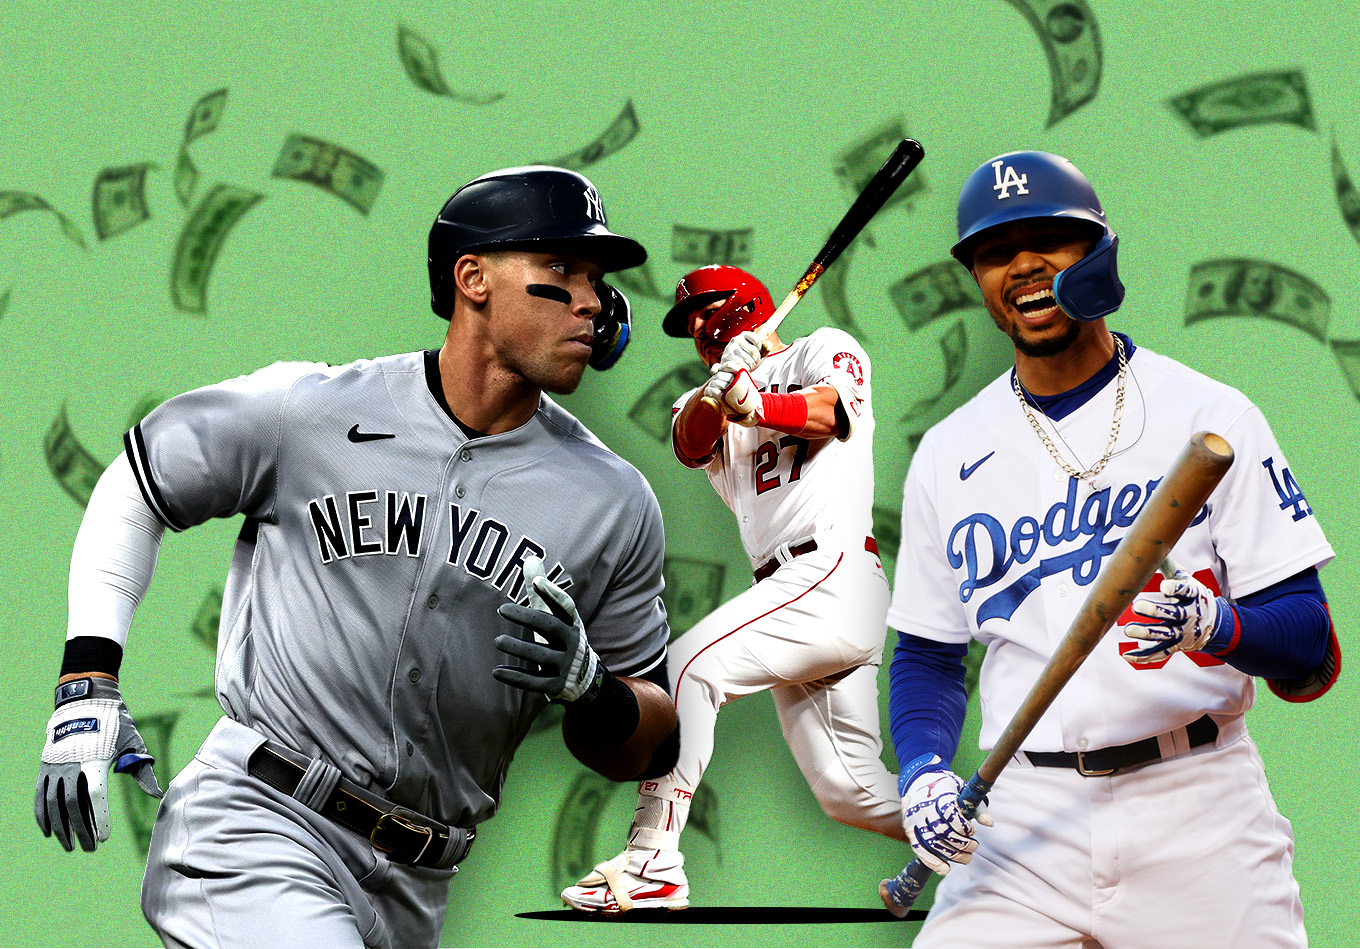 Top 10 Richest Baseball Players In The World By Net Worth